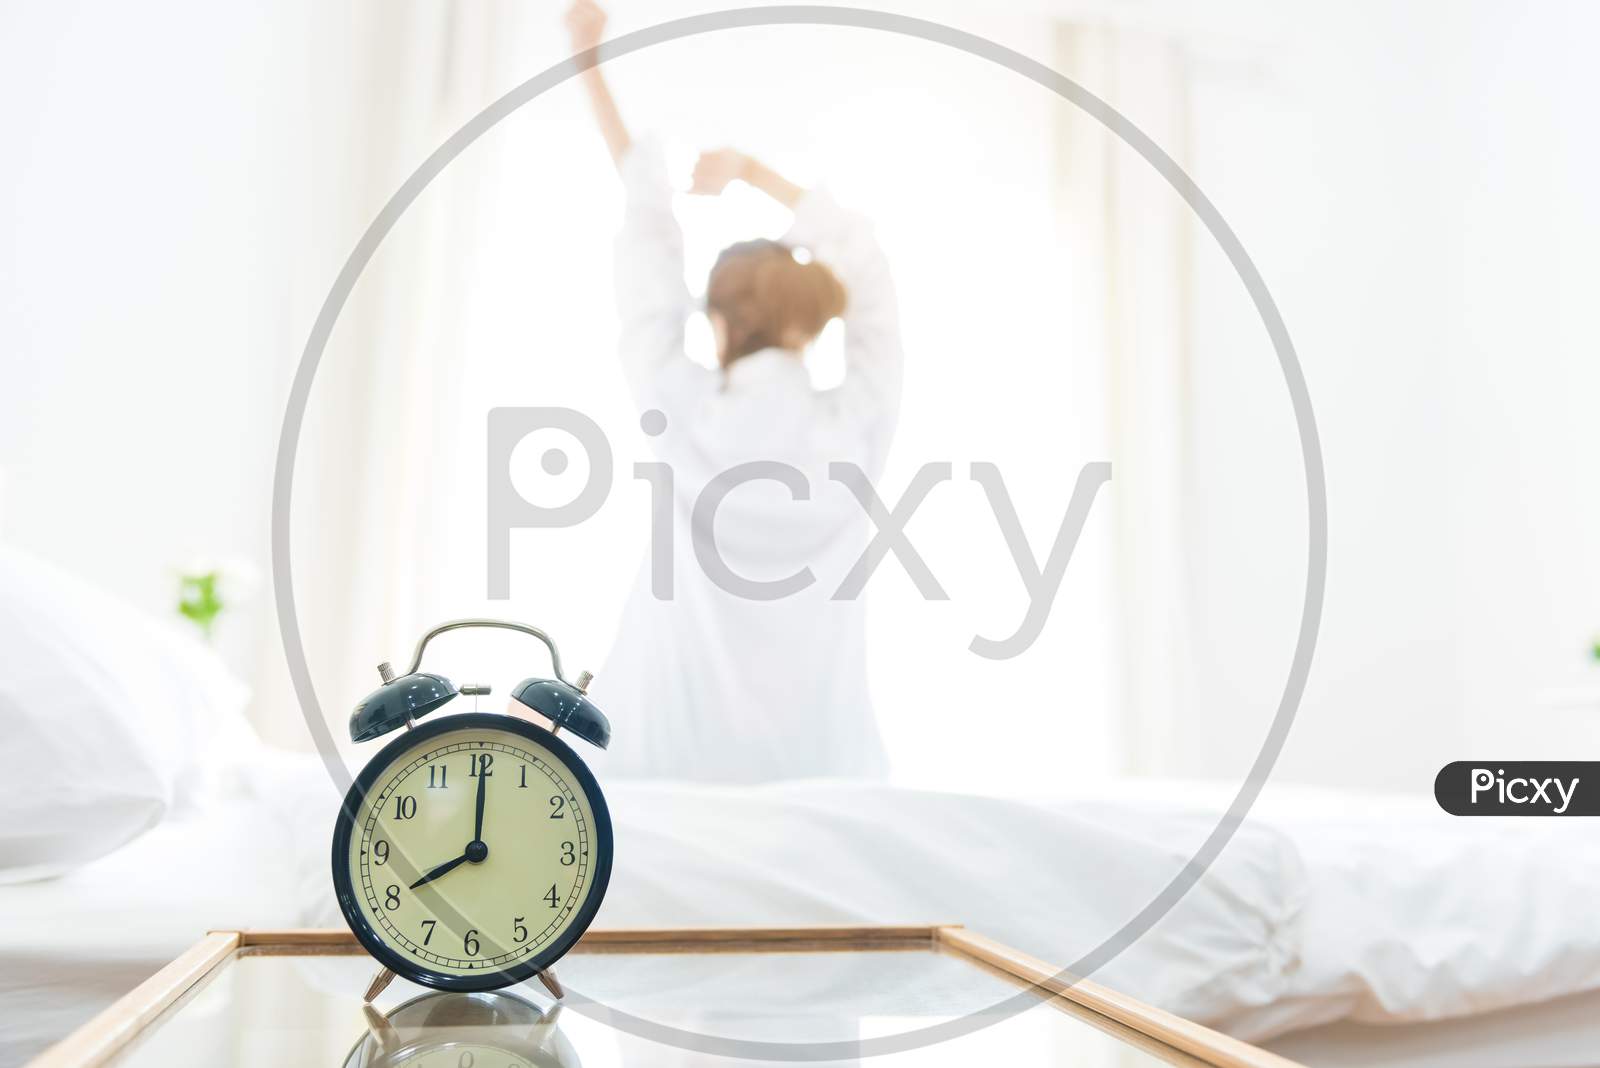 Back View Of Woman Stretching In Morning After Waking Up On Bed Near Window With Alarm Clock. Holiday And Relax Concept. Lazy Day And Working Day Concept. Office Woman And Worker In Daily Life Theme